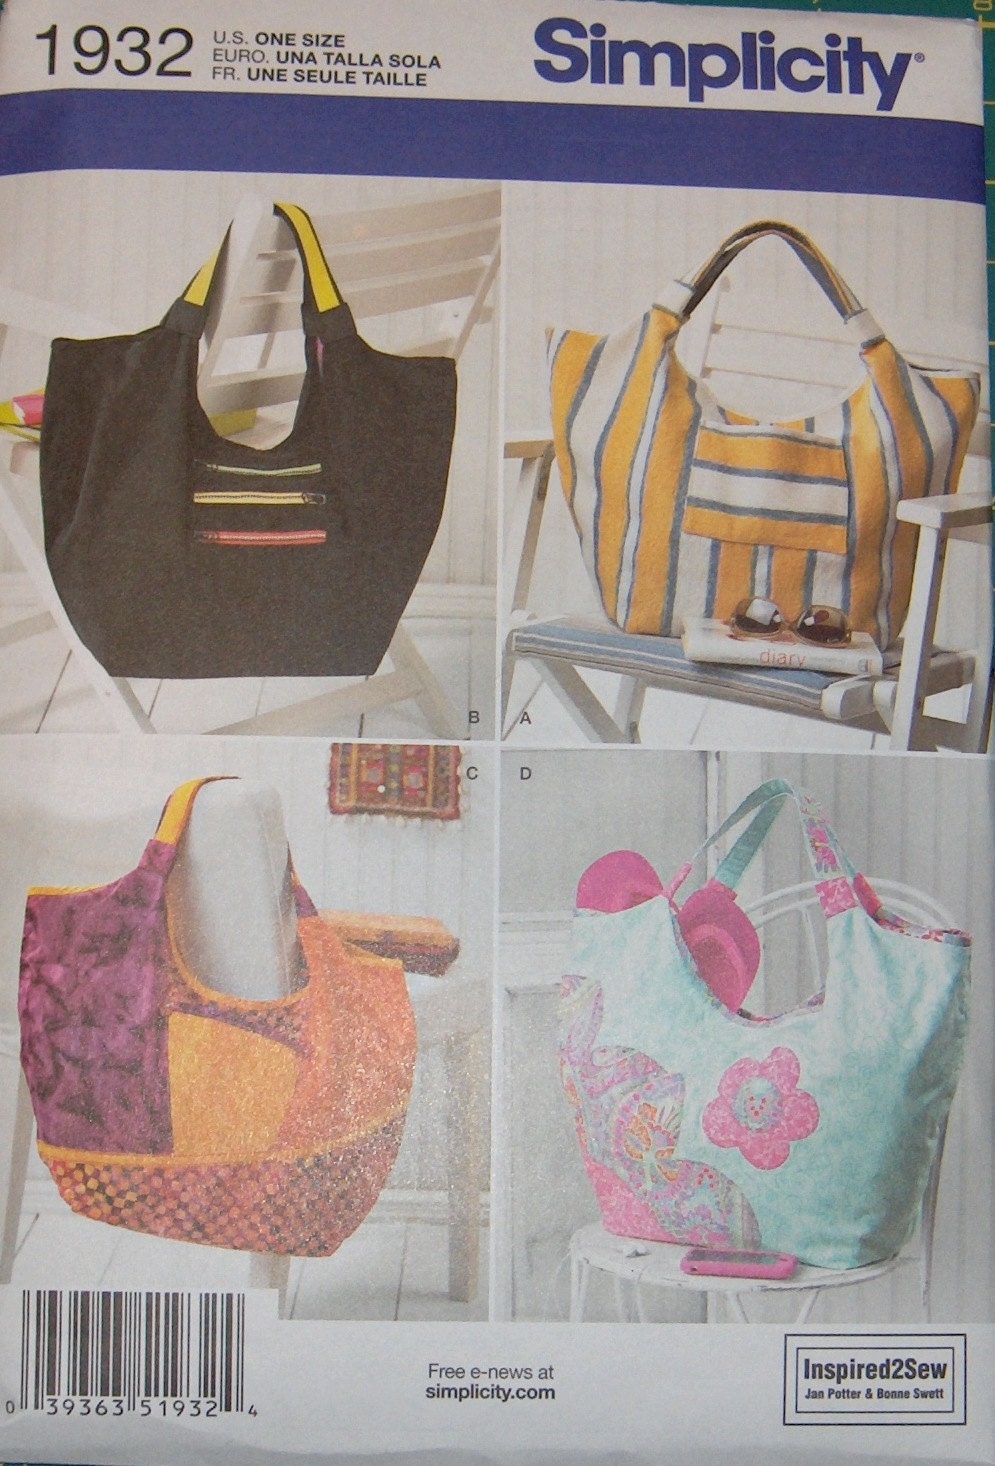 Simplicity Versatile Tote Bag Pattern No. 1932 by ChinenTwo